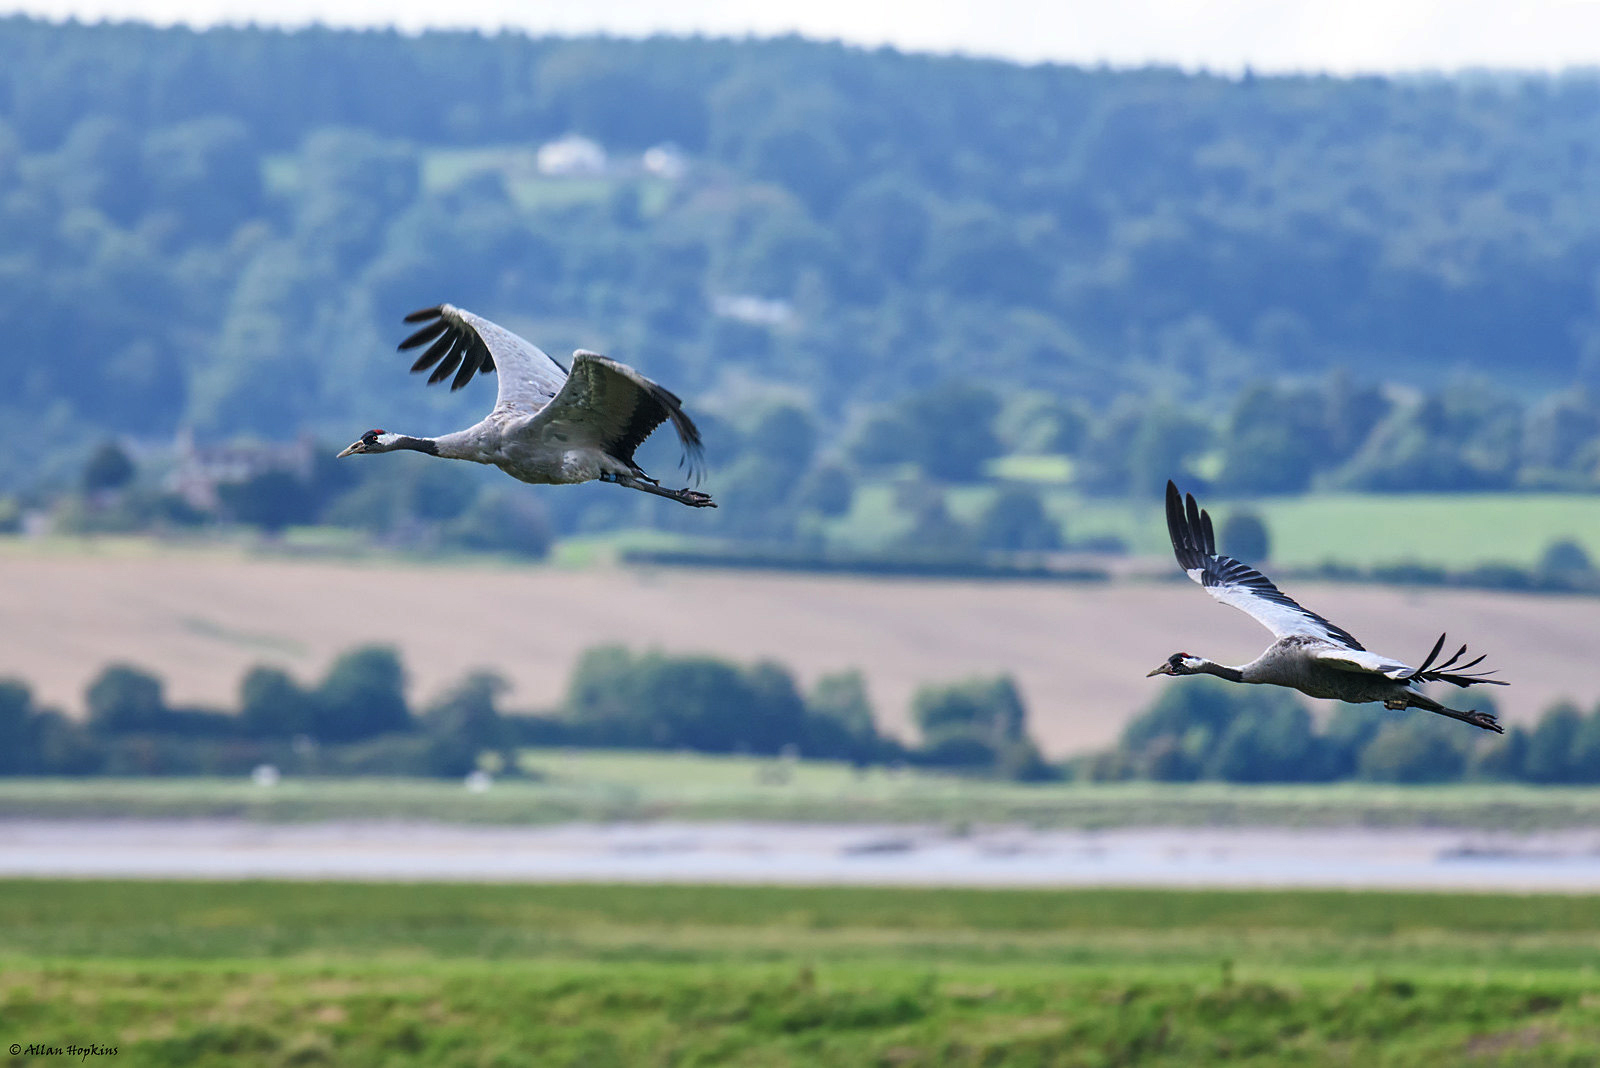 Two cranes flying over wetlands with low hills in the background